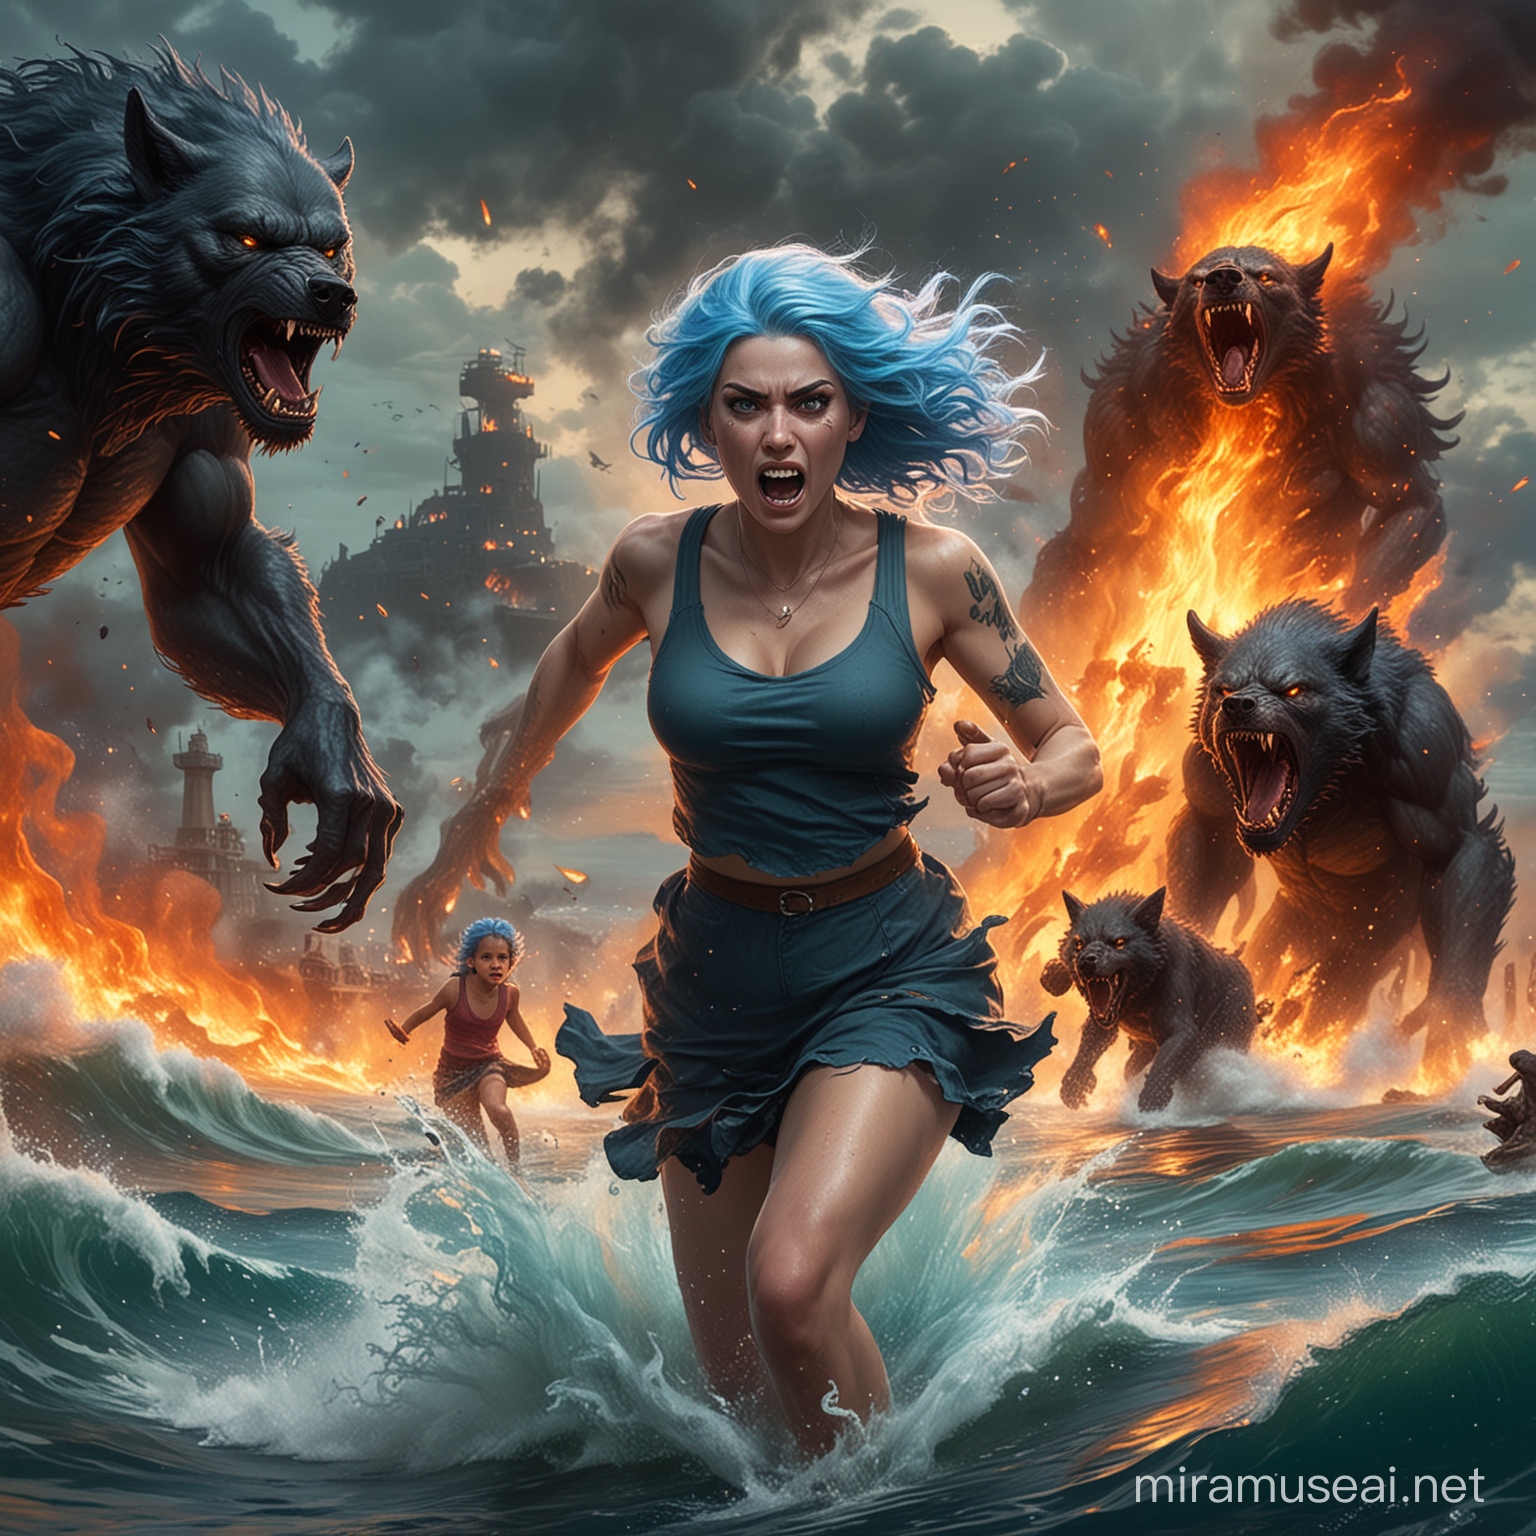 Courageous Mother Protects Daughter from Pursuing Werewolves Amidst Fiery Ocean Chase